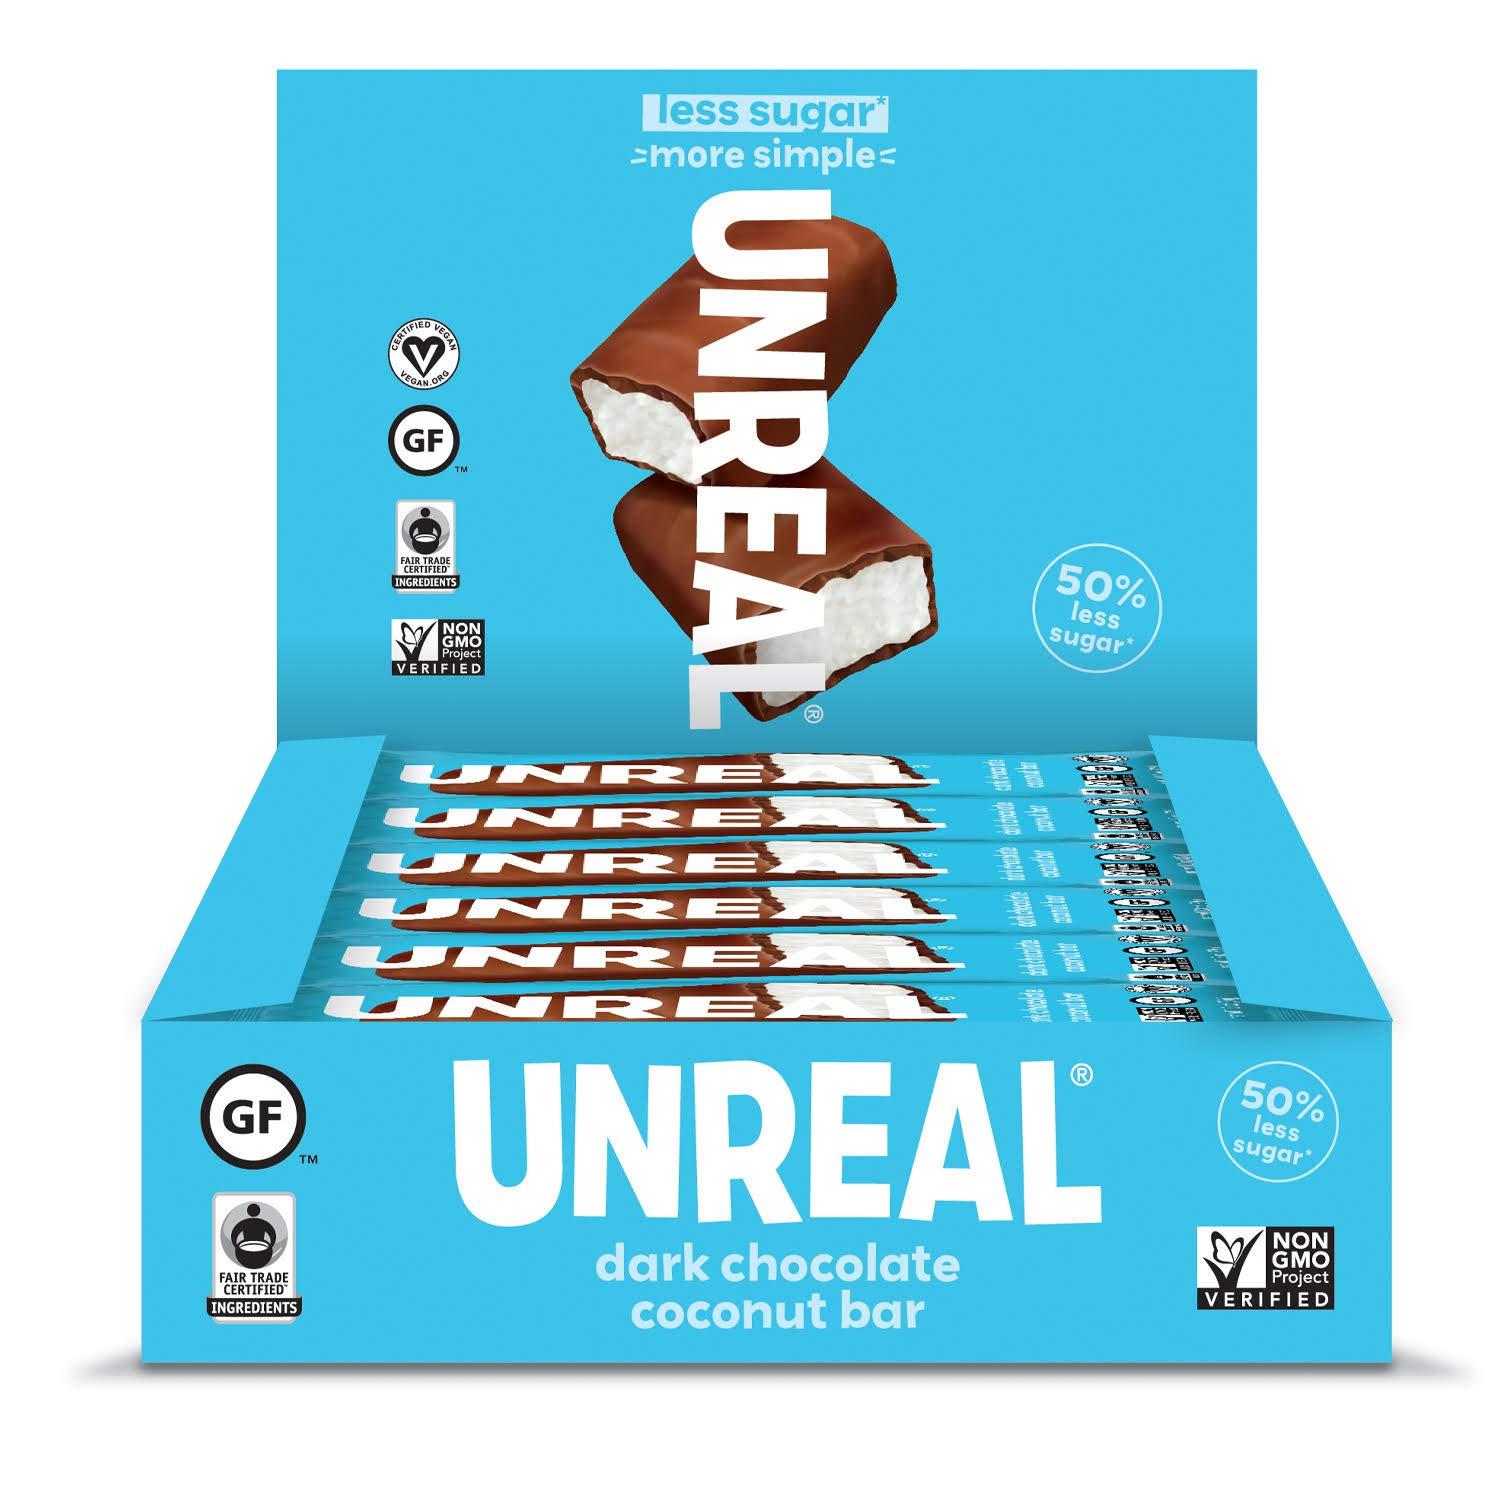 UNREAL Dark Chocolate Coconut Bars , $24 for a pack of 12 on amazon.com